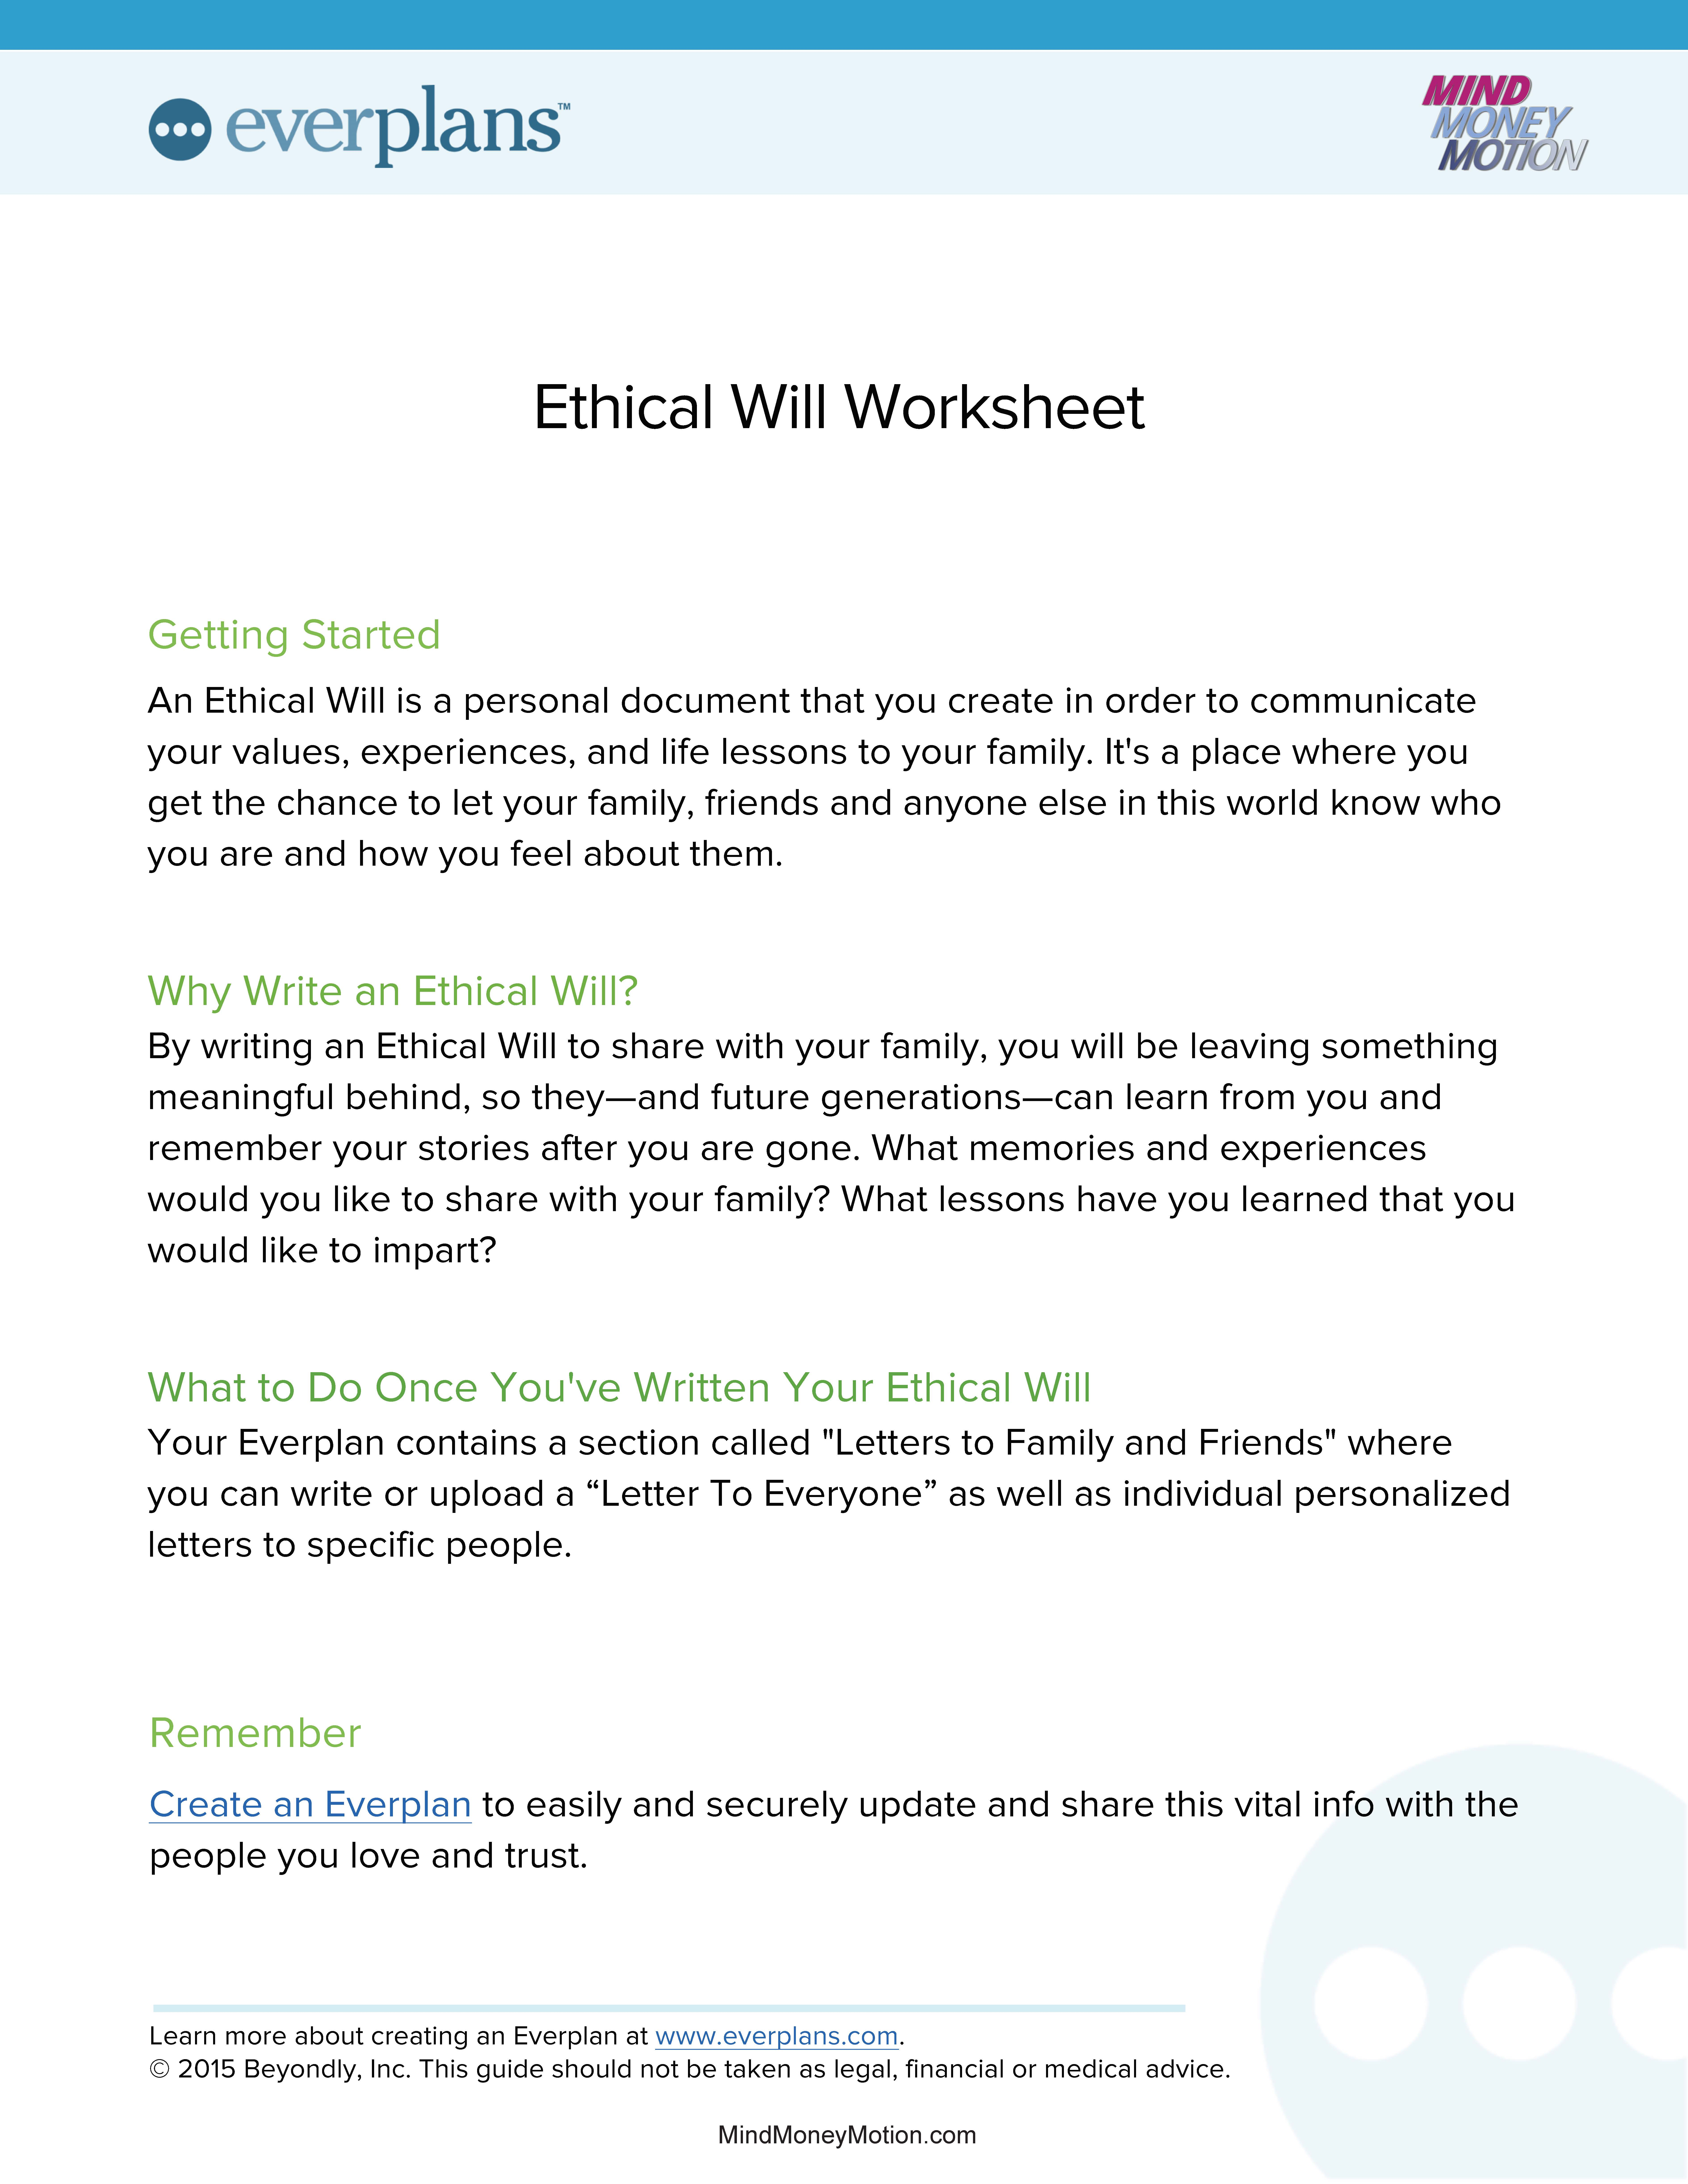 Ethical Will Worksheet thumbnail_Page_1